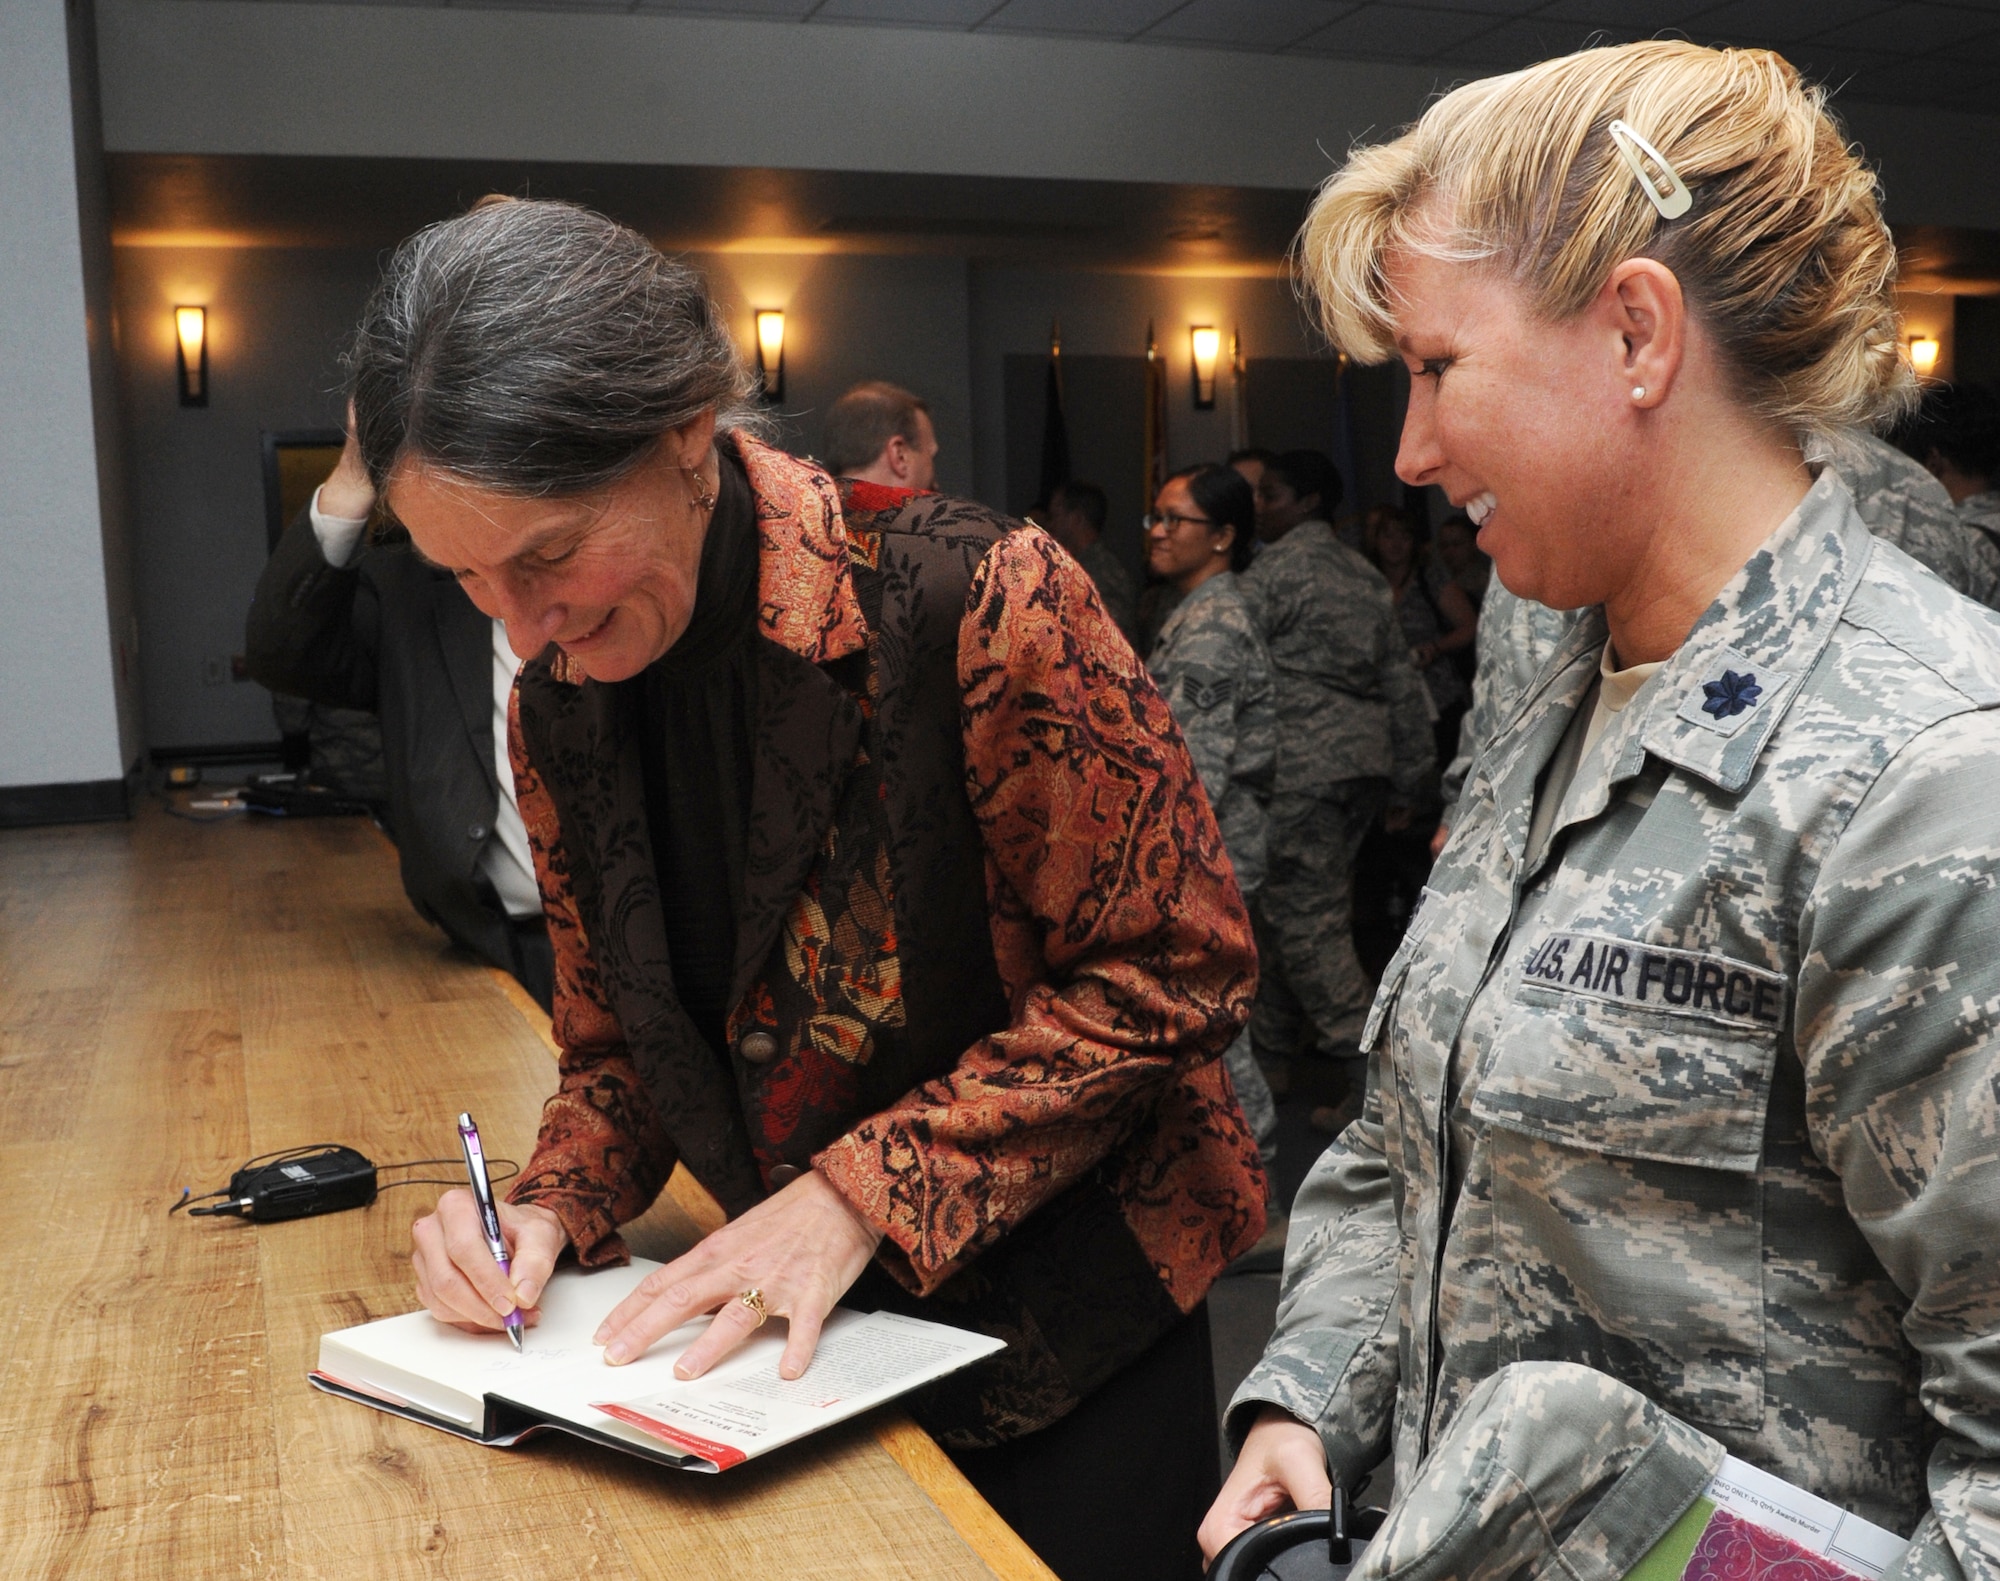 Retired Army Brig. Gen. Rhonda Cornum autographs a book she wrote about her experience as a prisoner of war in Iraq in 1991 for Lt. Col. Dorene Ross, 335th Training Squadron commander, Dec. 5, 2013, at the Keesler Medical Center.  During the Persian Gulf War, Cornum’s helicopter was shot down while on a search and rescue mission. She suffered two broken arms, a gunshot wound in the back and was captured by enemy forces. Cornum is the wife of Brig. Gen. Kory Cornum, 81st Medical Group commander. (U.S. Air Force photo by Kemberly Groue)